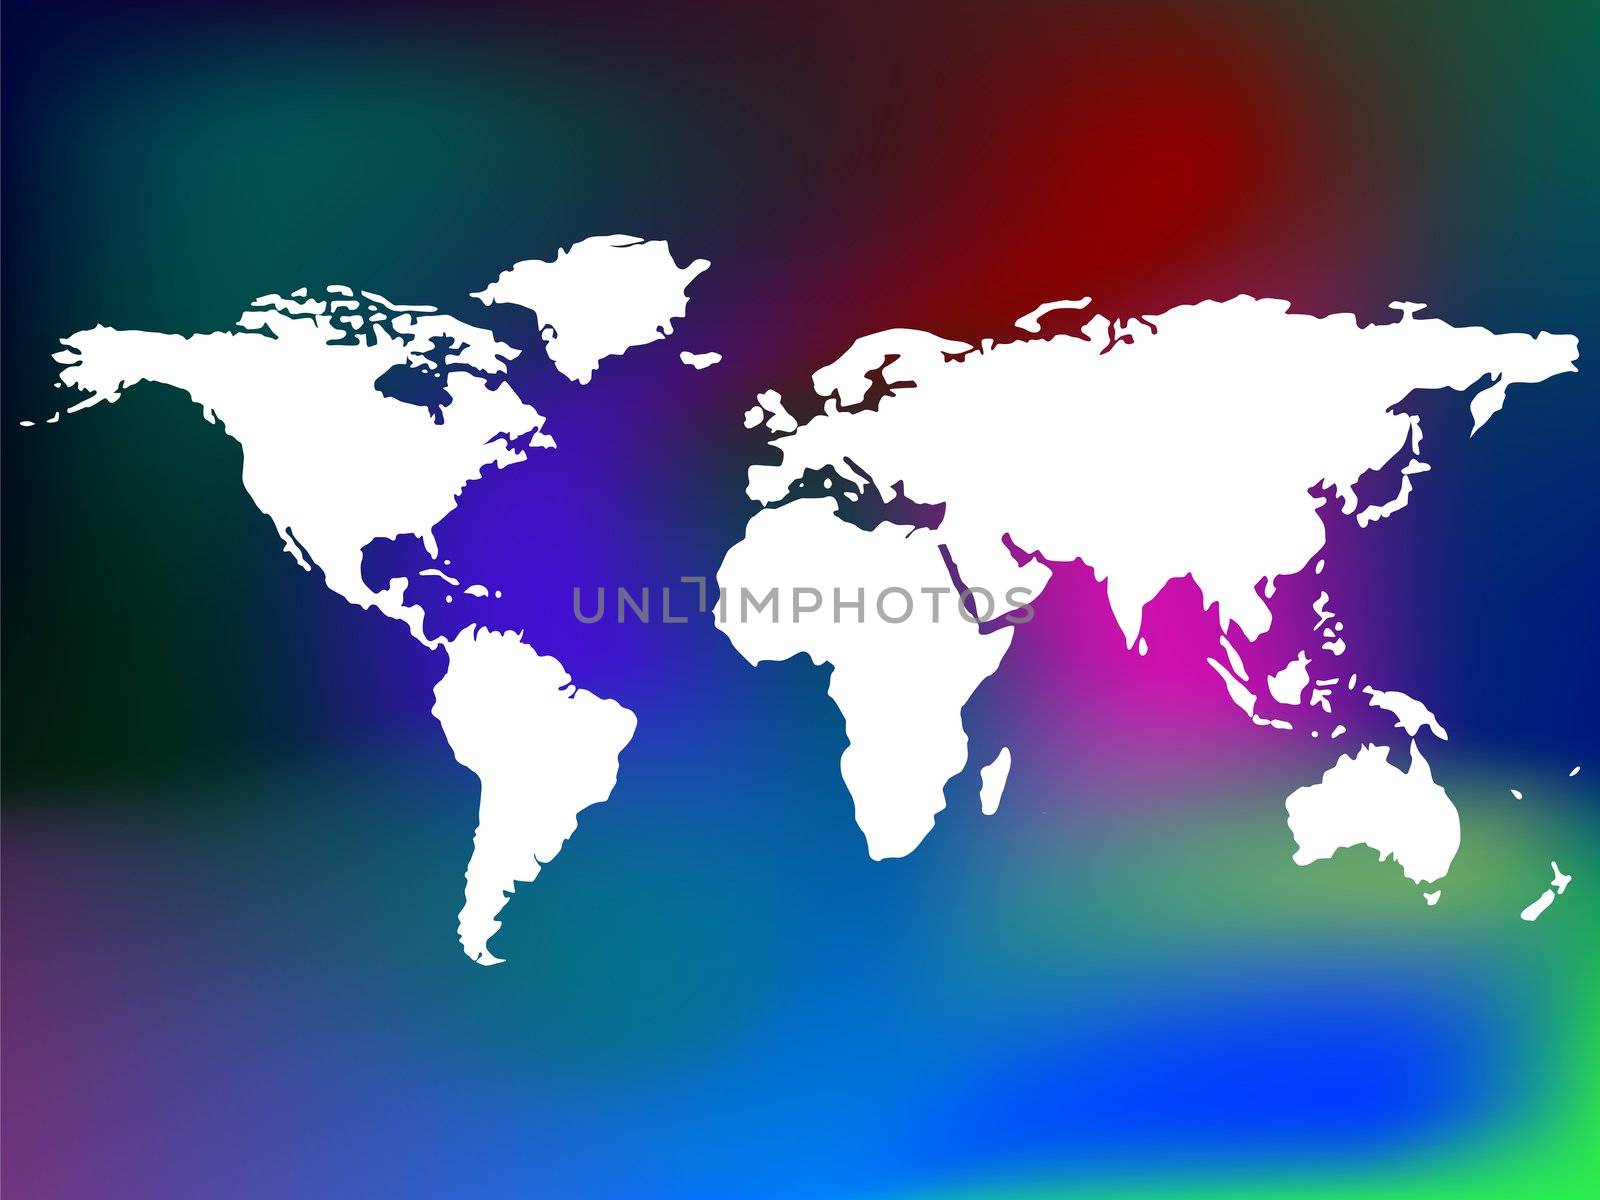 unique abstract background and world map, vector art illustration